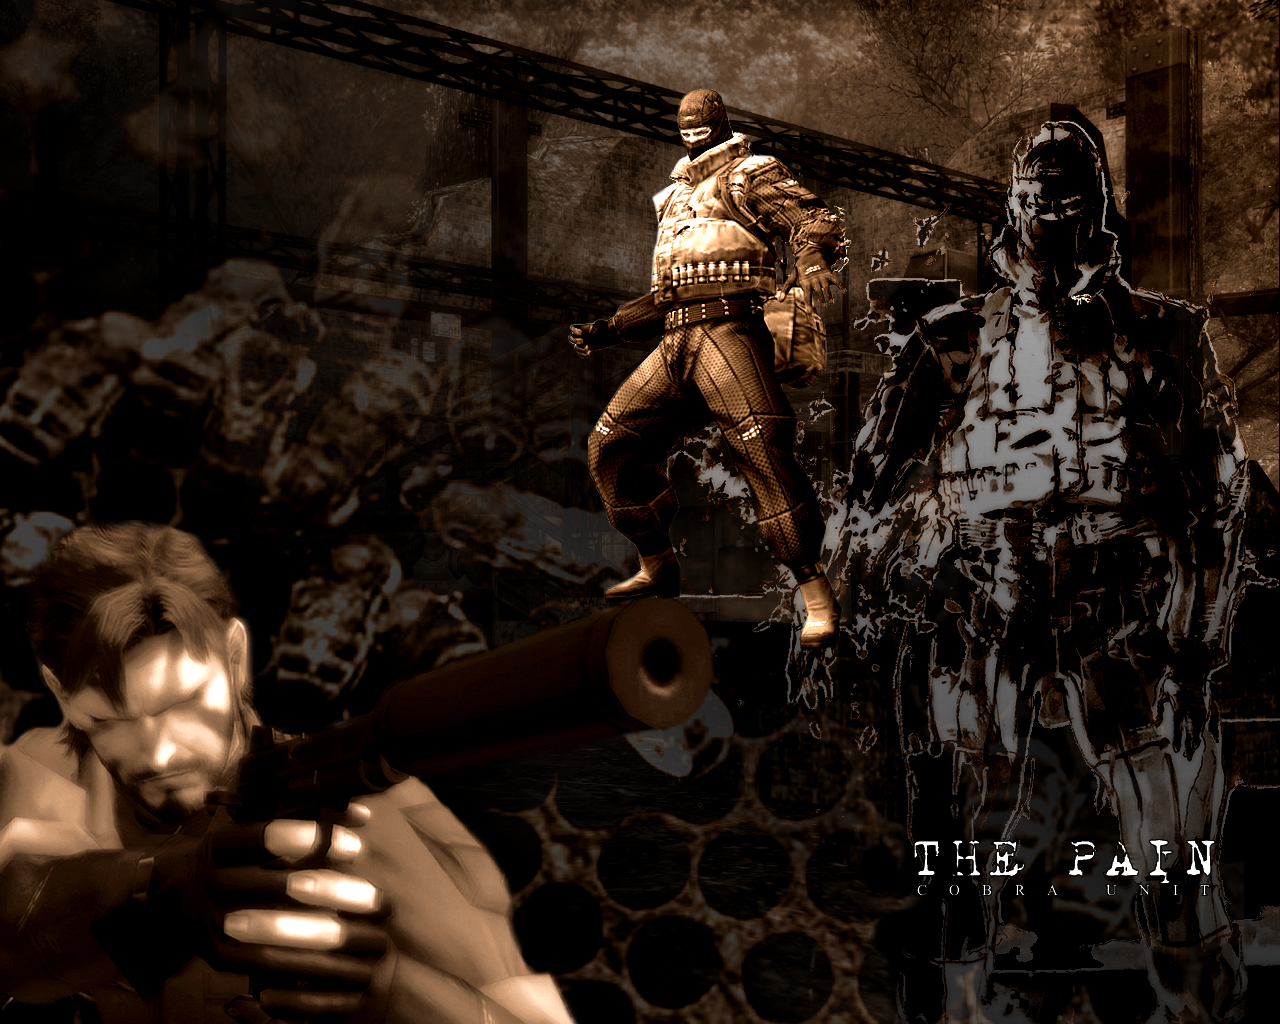 MGS3: The Pain by DjG-Wp on DeviantArt